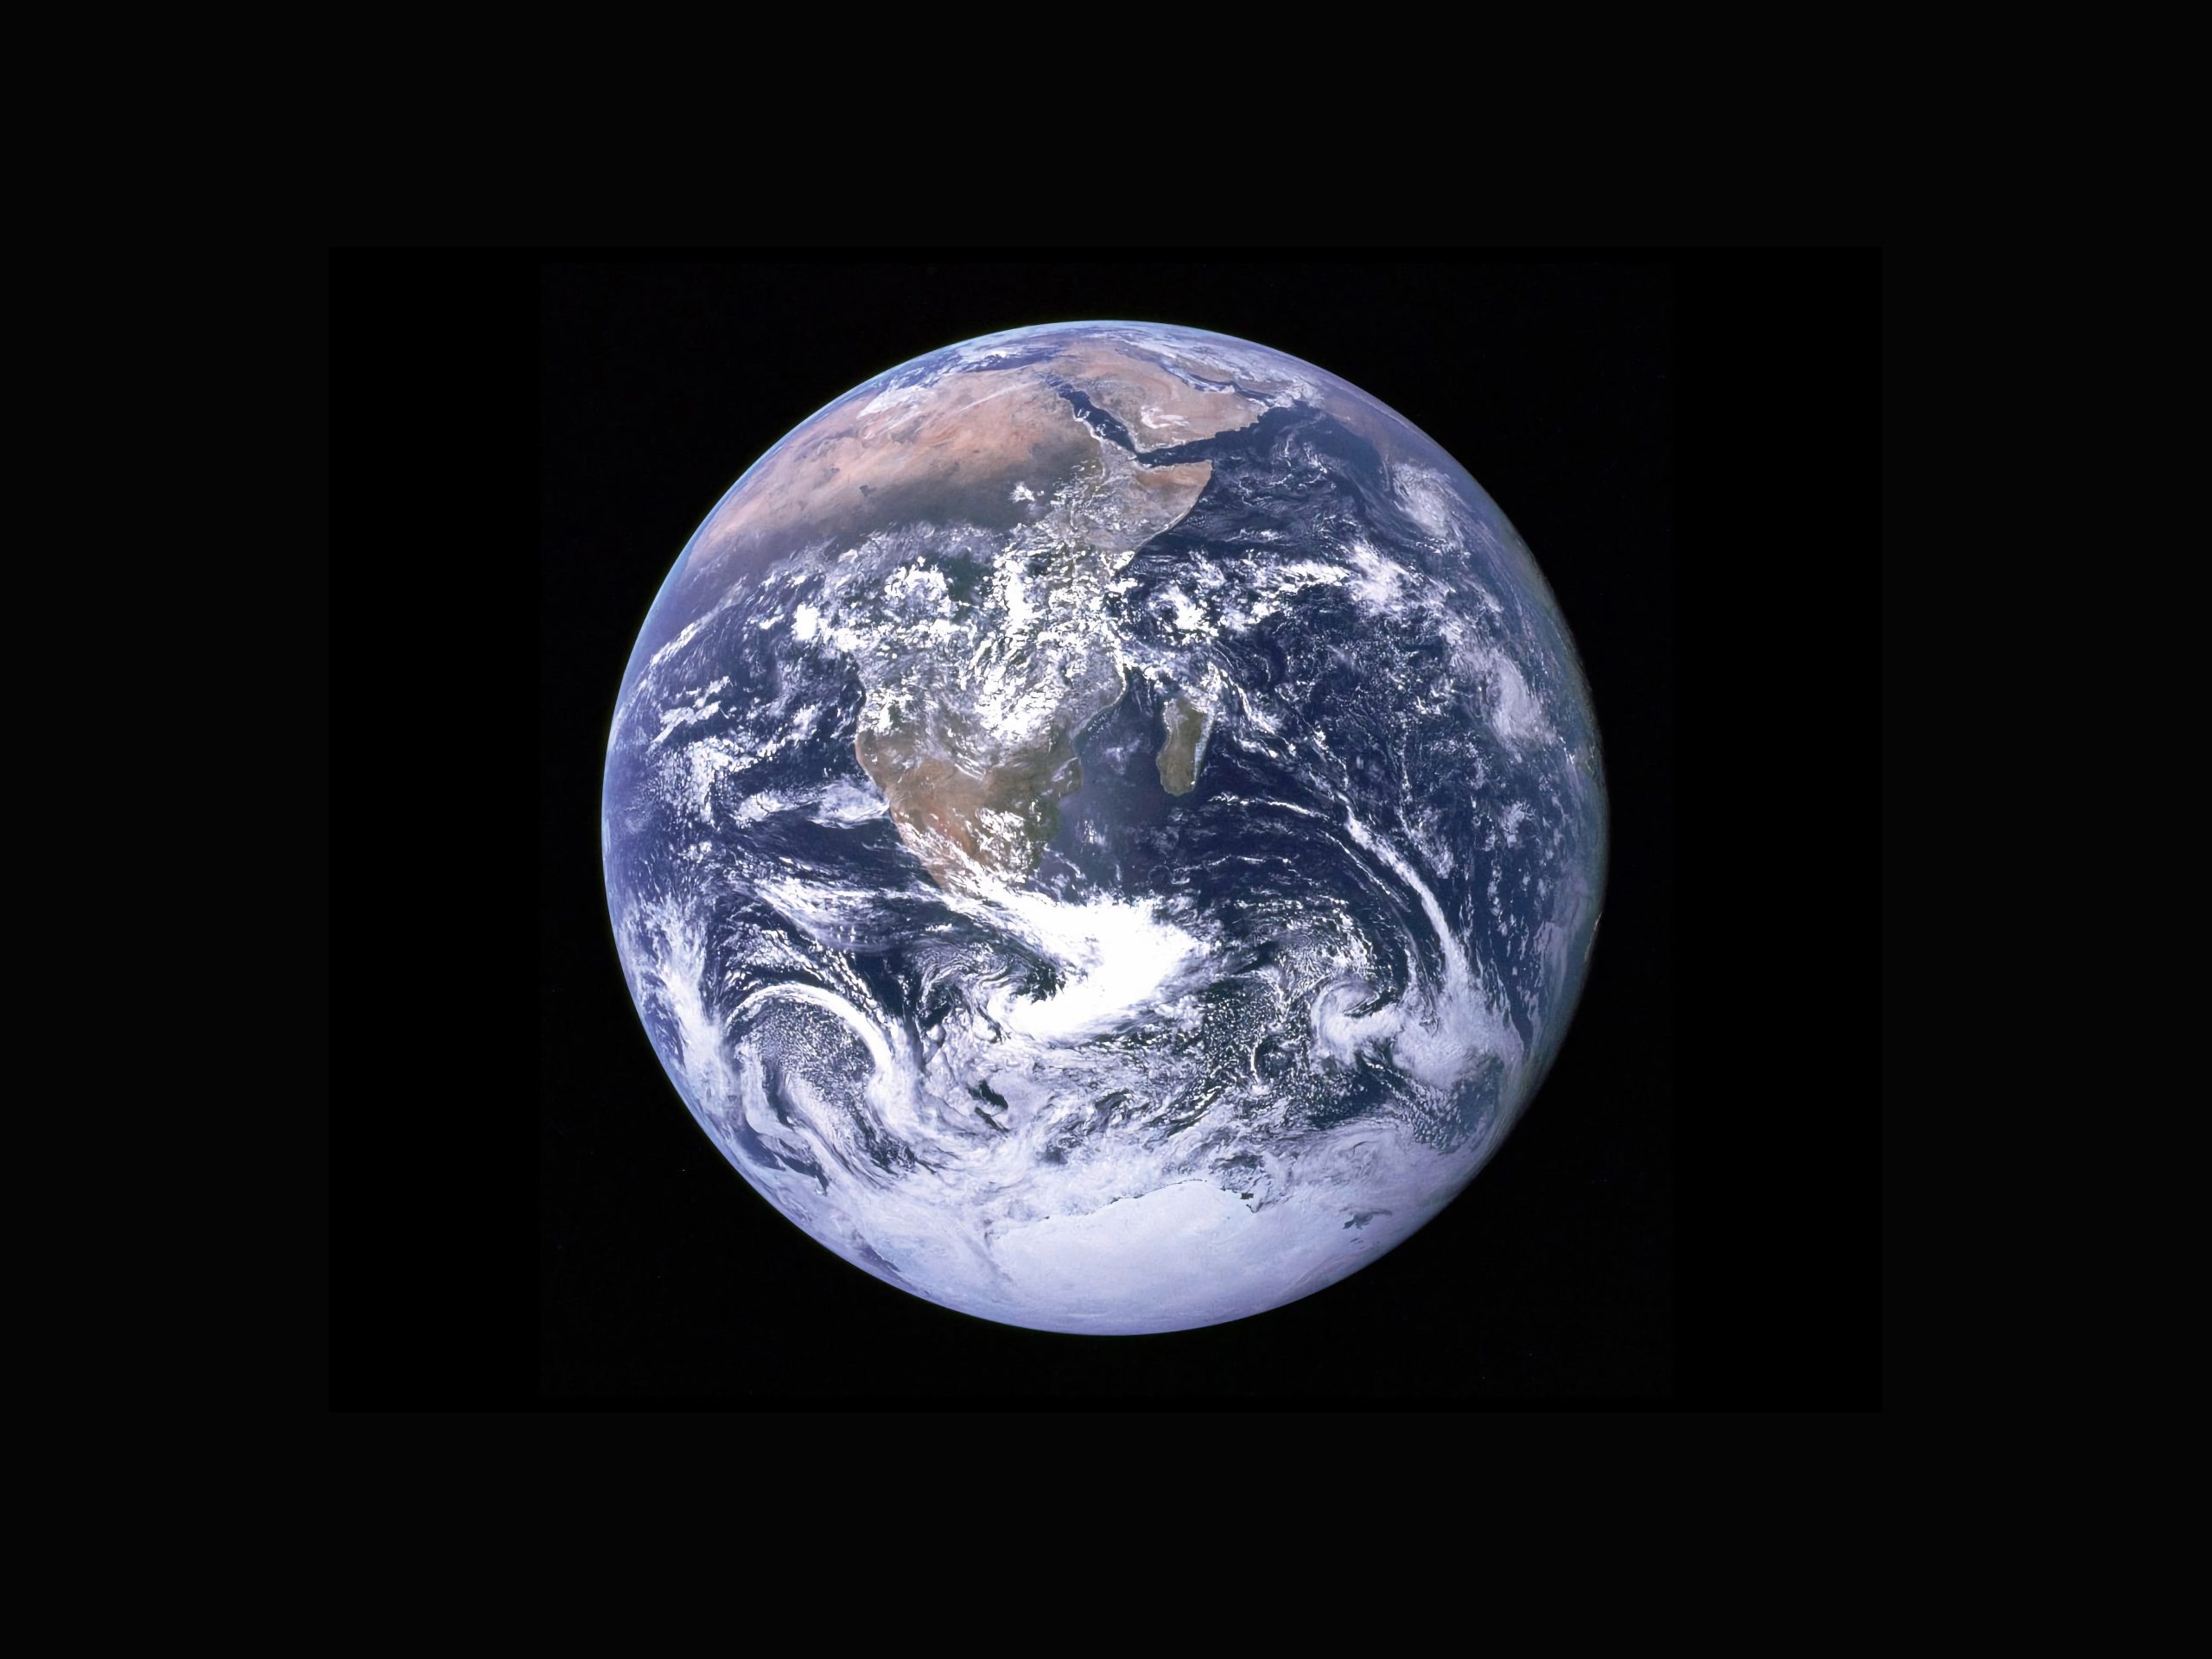 [Image: Black background with a stock image of the Earth in space taken by NASA.]